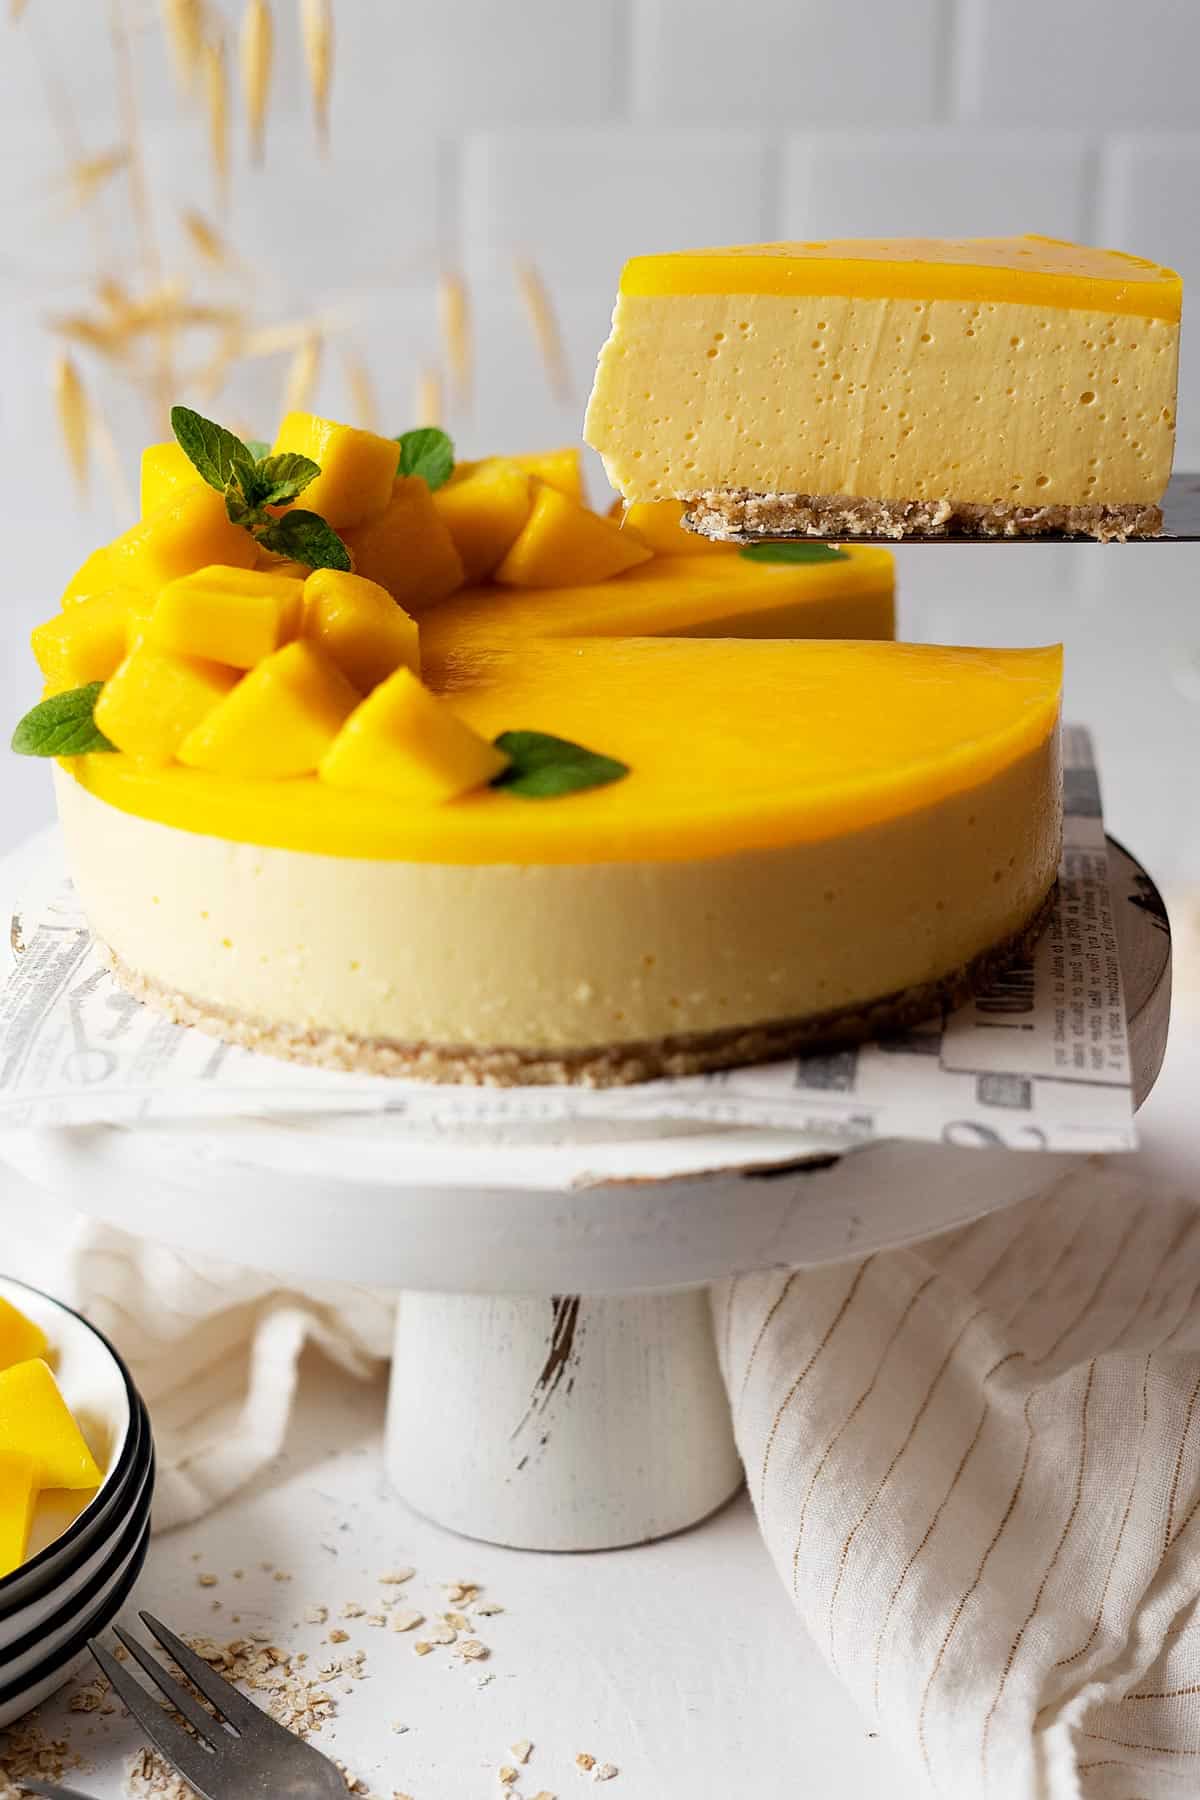 Taking a slice of healthy no bake mango cheesecake from a cake stand